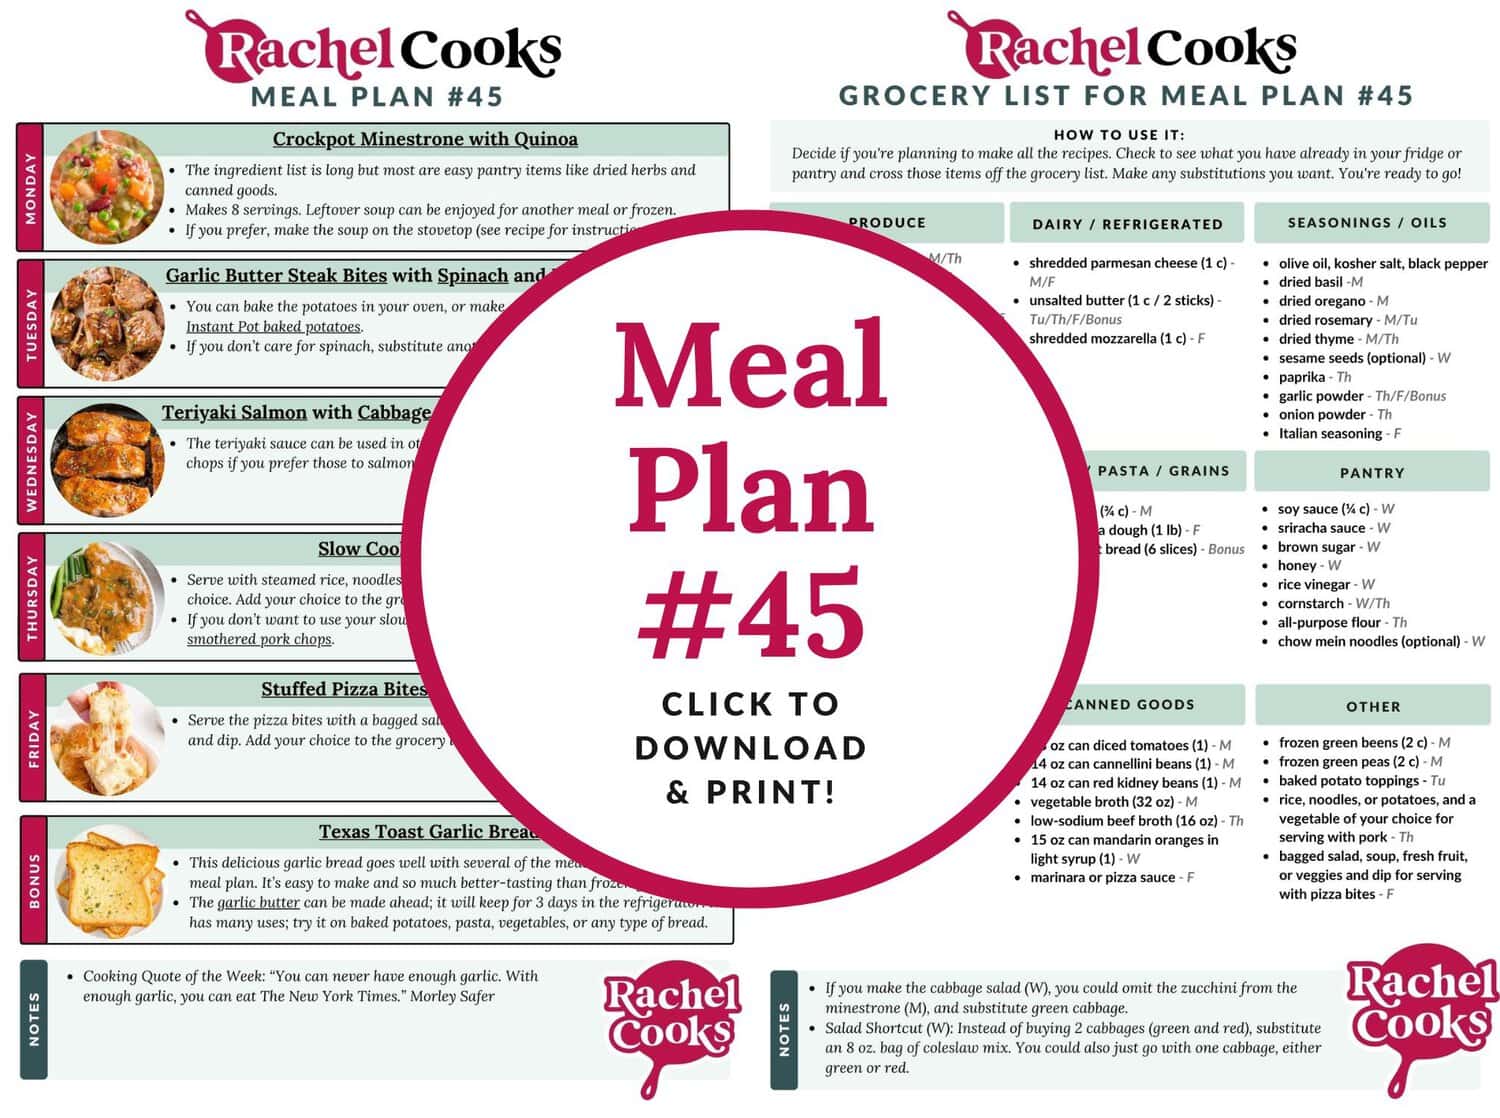 Meal plan 45 preview image.